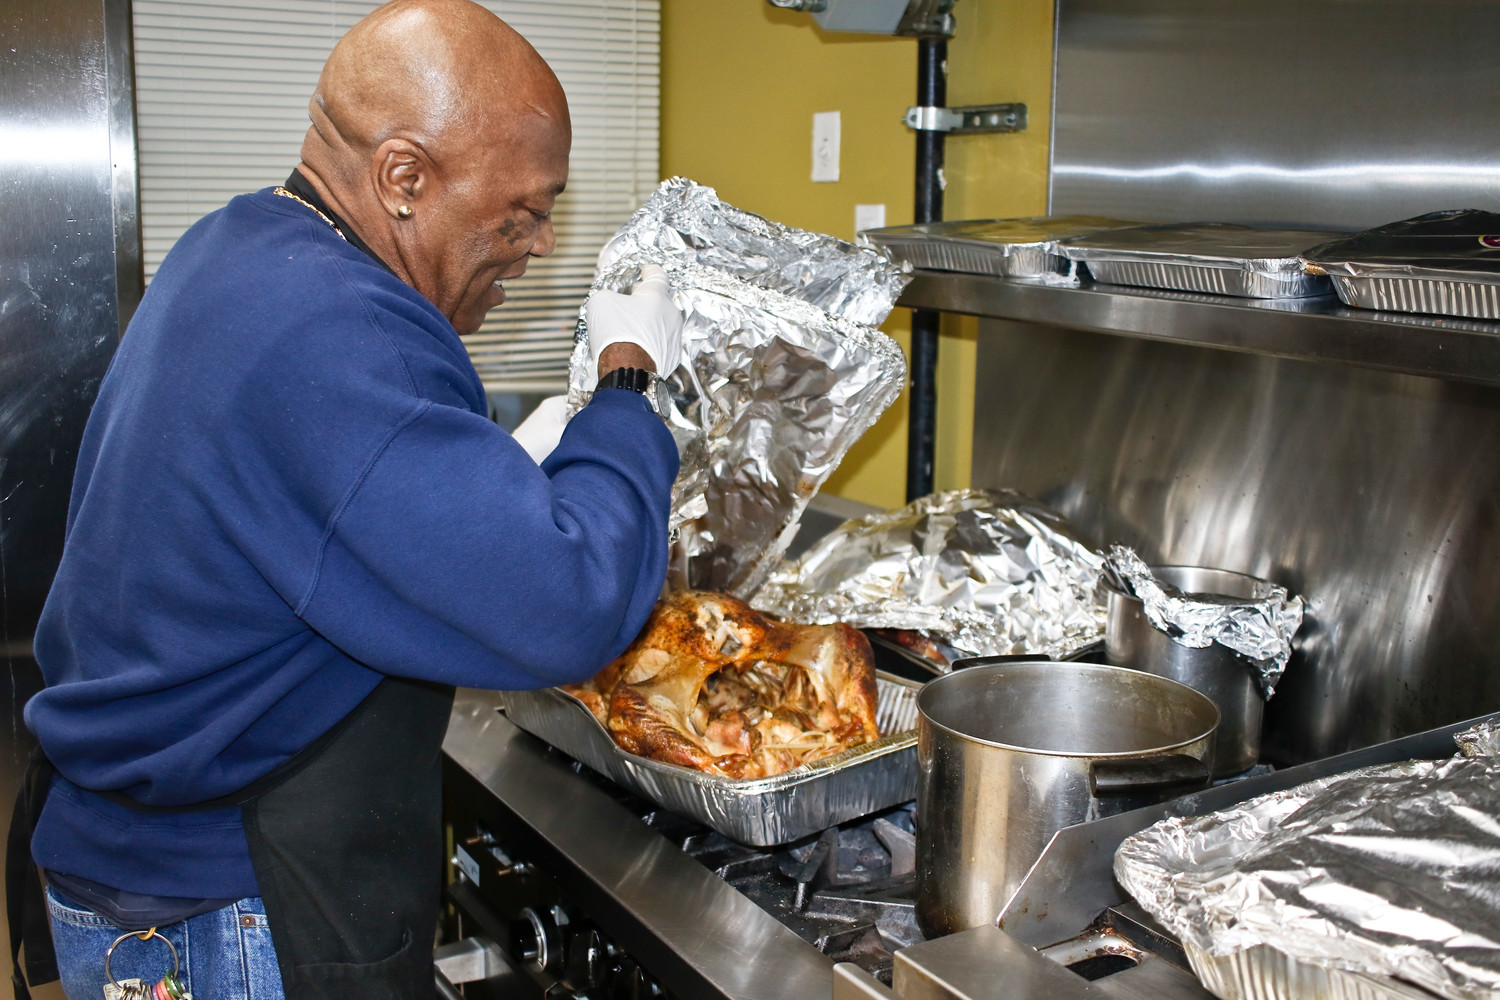 Melvin Lewis prepared eight turkeys, ham and 40 pounds of roasted potatoes for the community dinner.